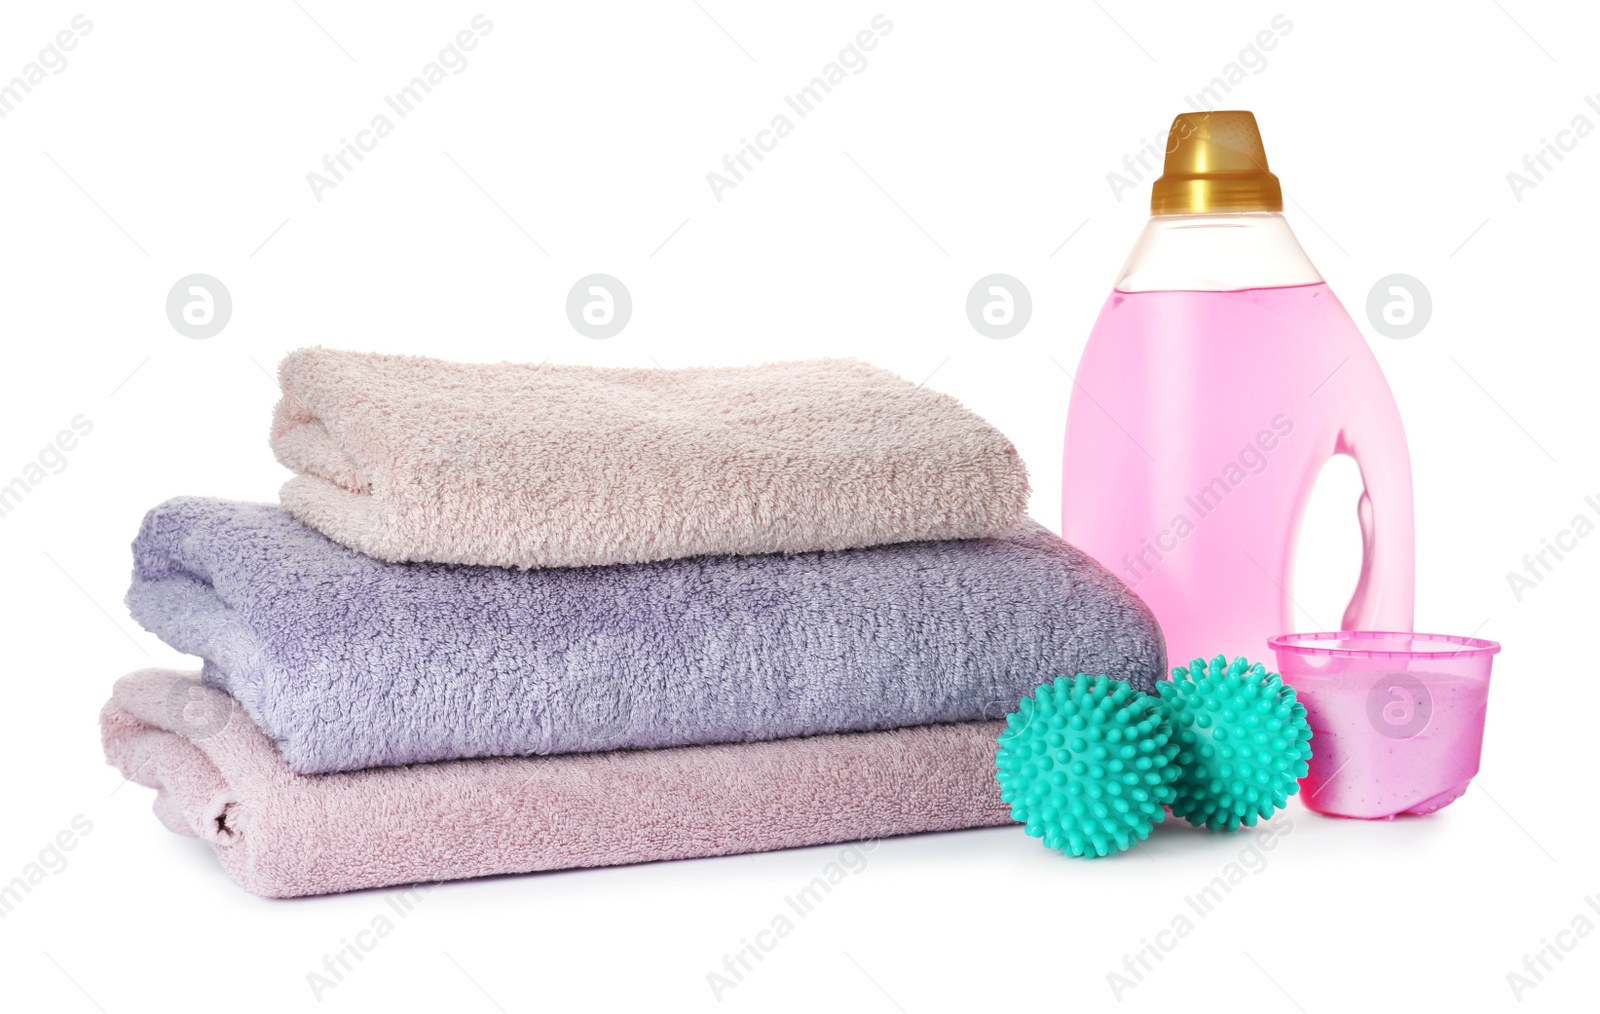 Photo of Dryer balls, detergents and stacked clean towels on white background